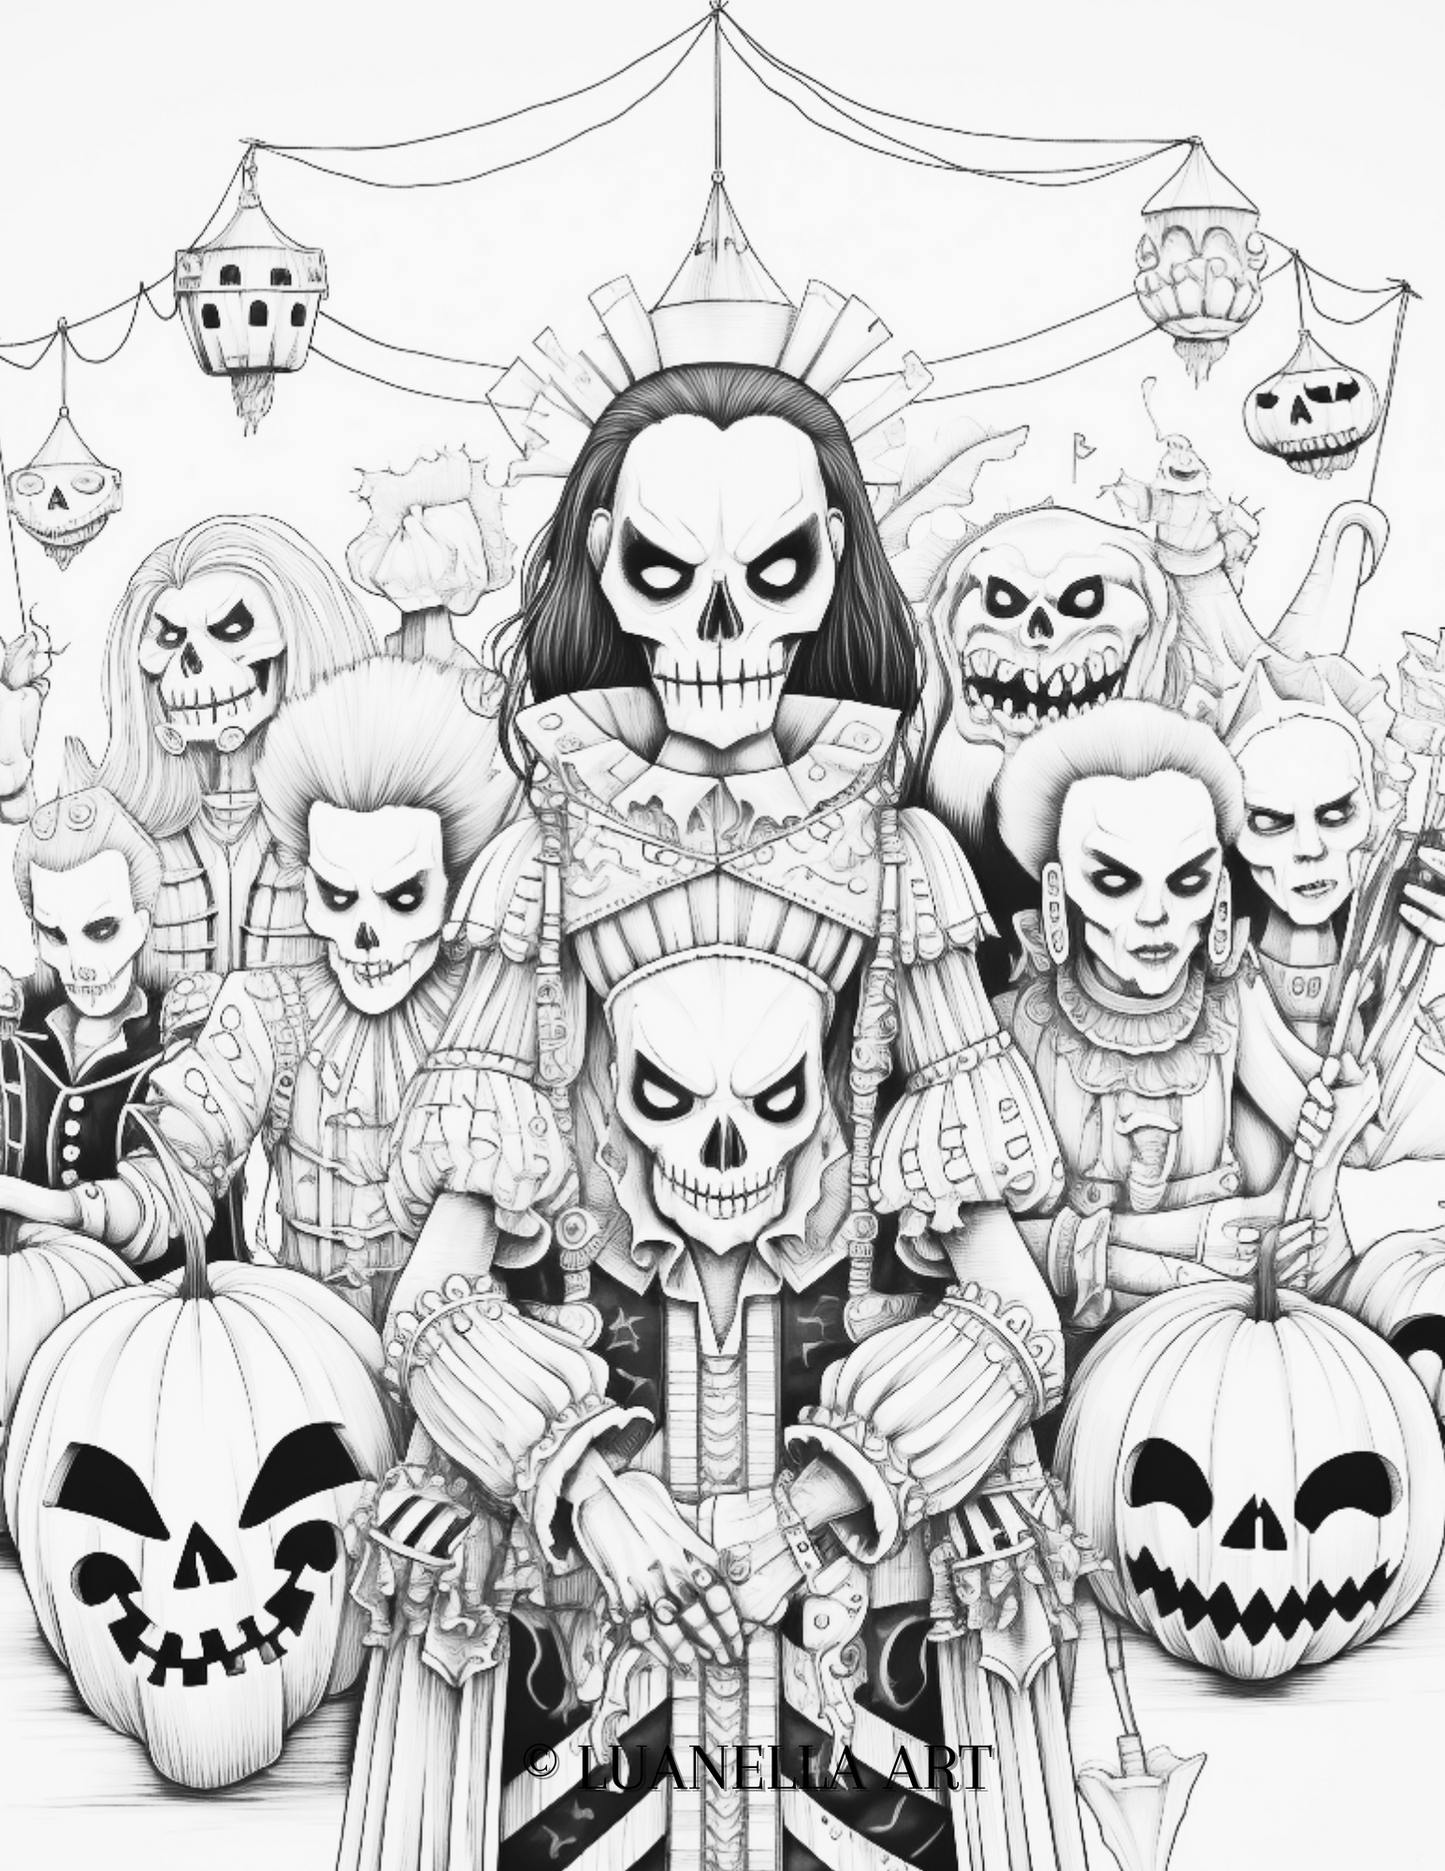 Scary Halloween characters with carved pumpkins | Coloring Page | Instant Digital Download